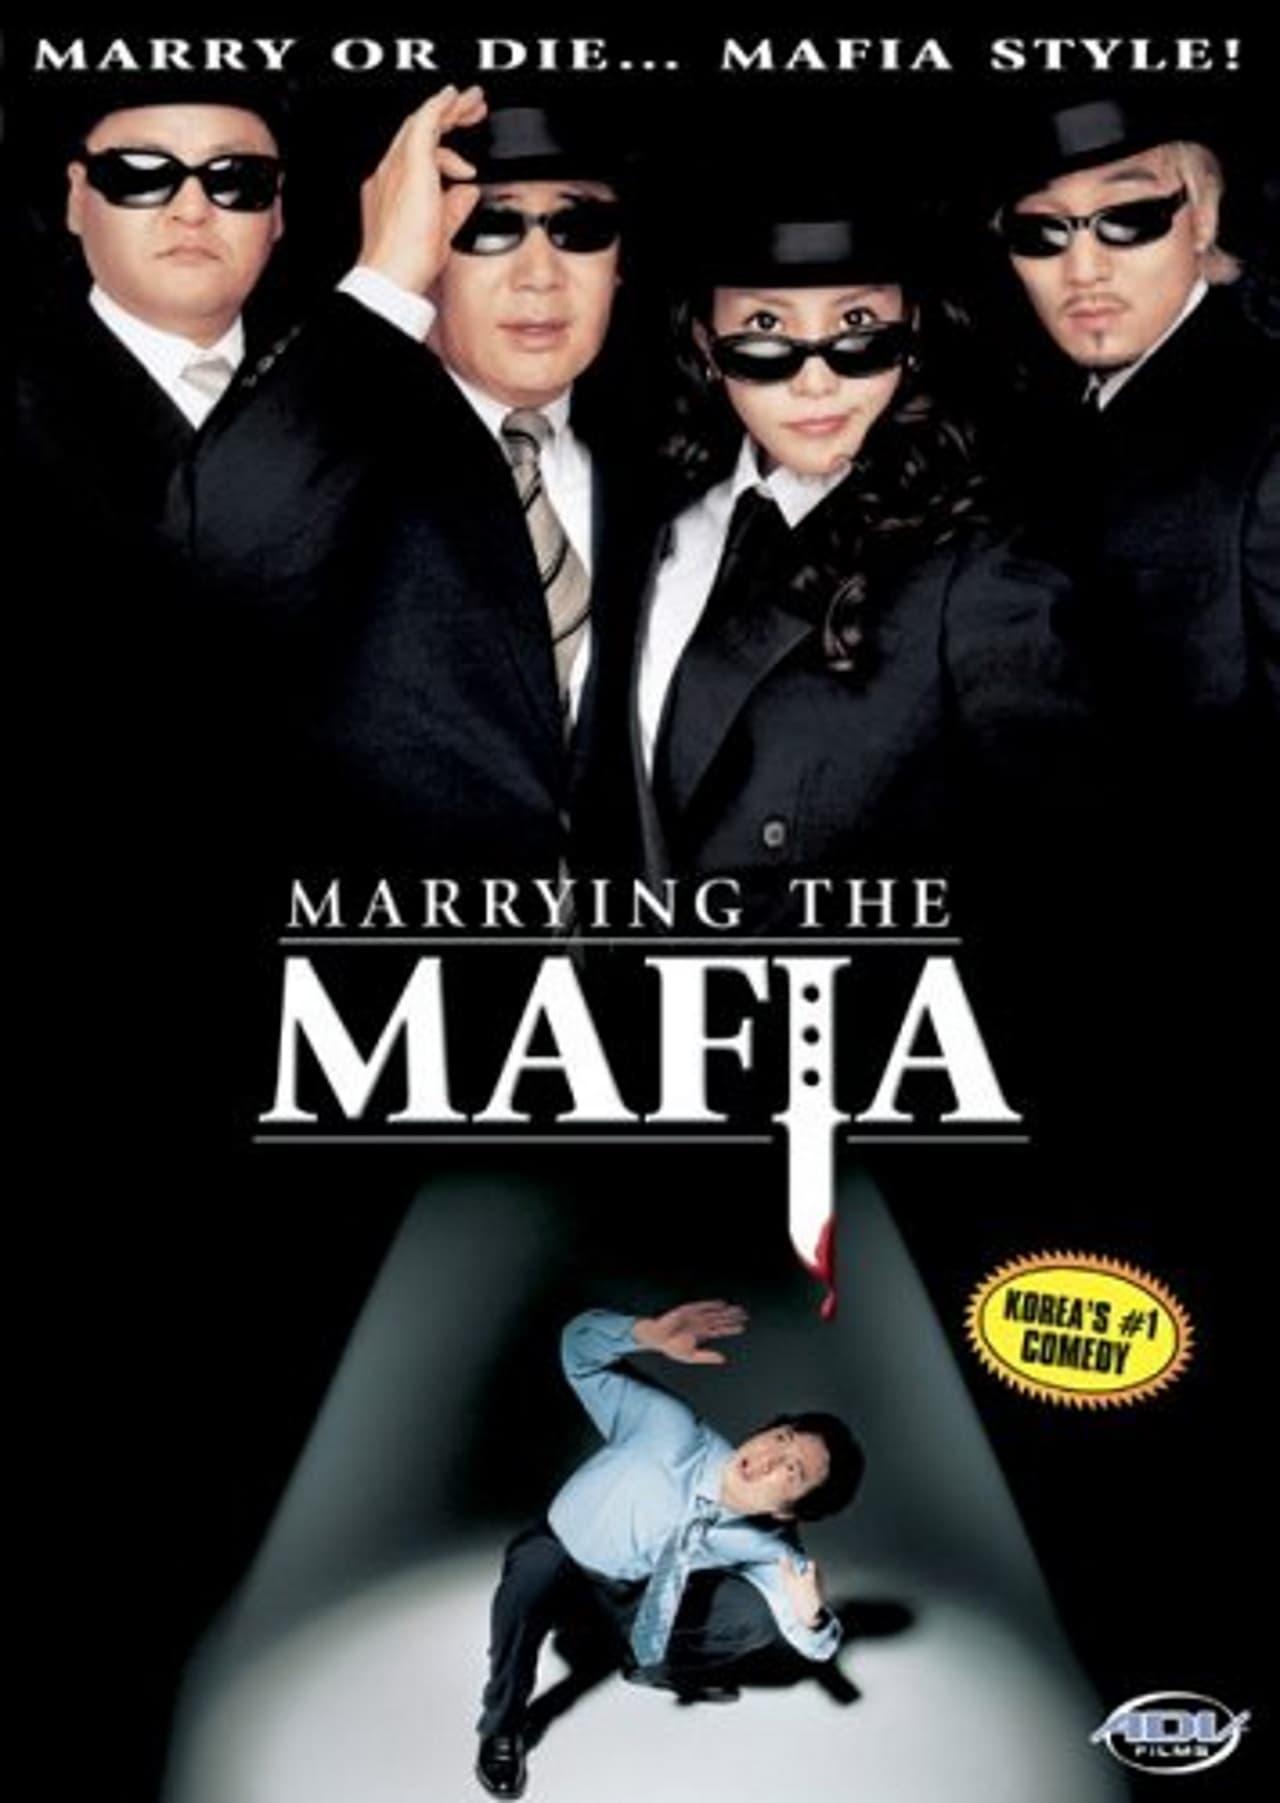 Marrying the Mafia poster